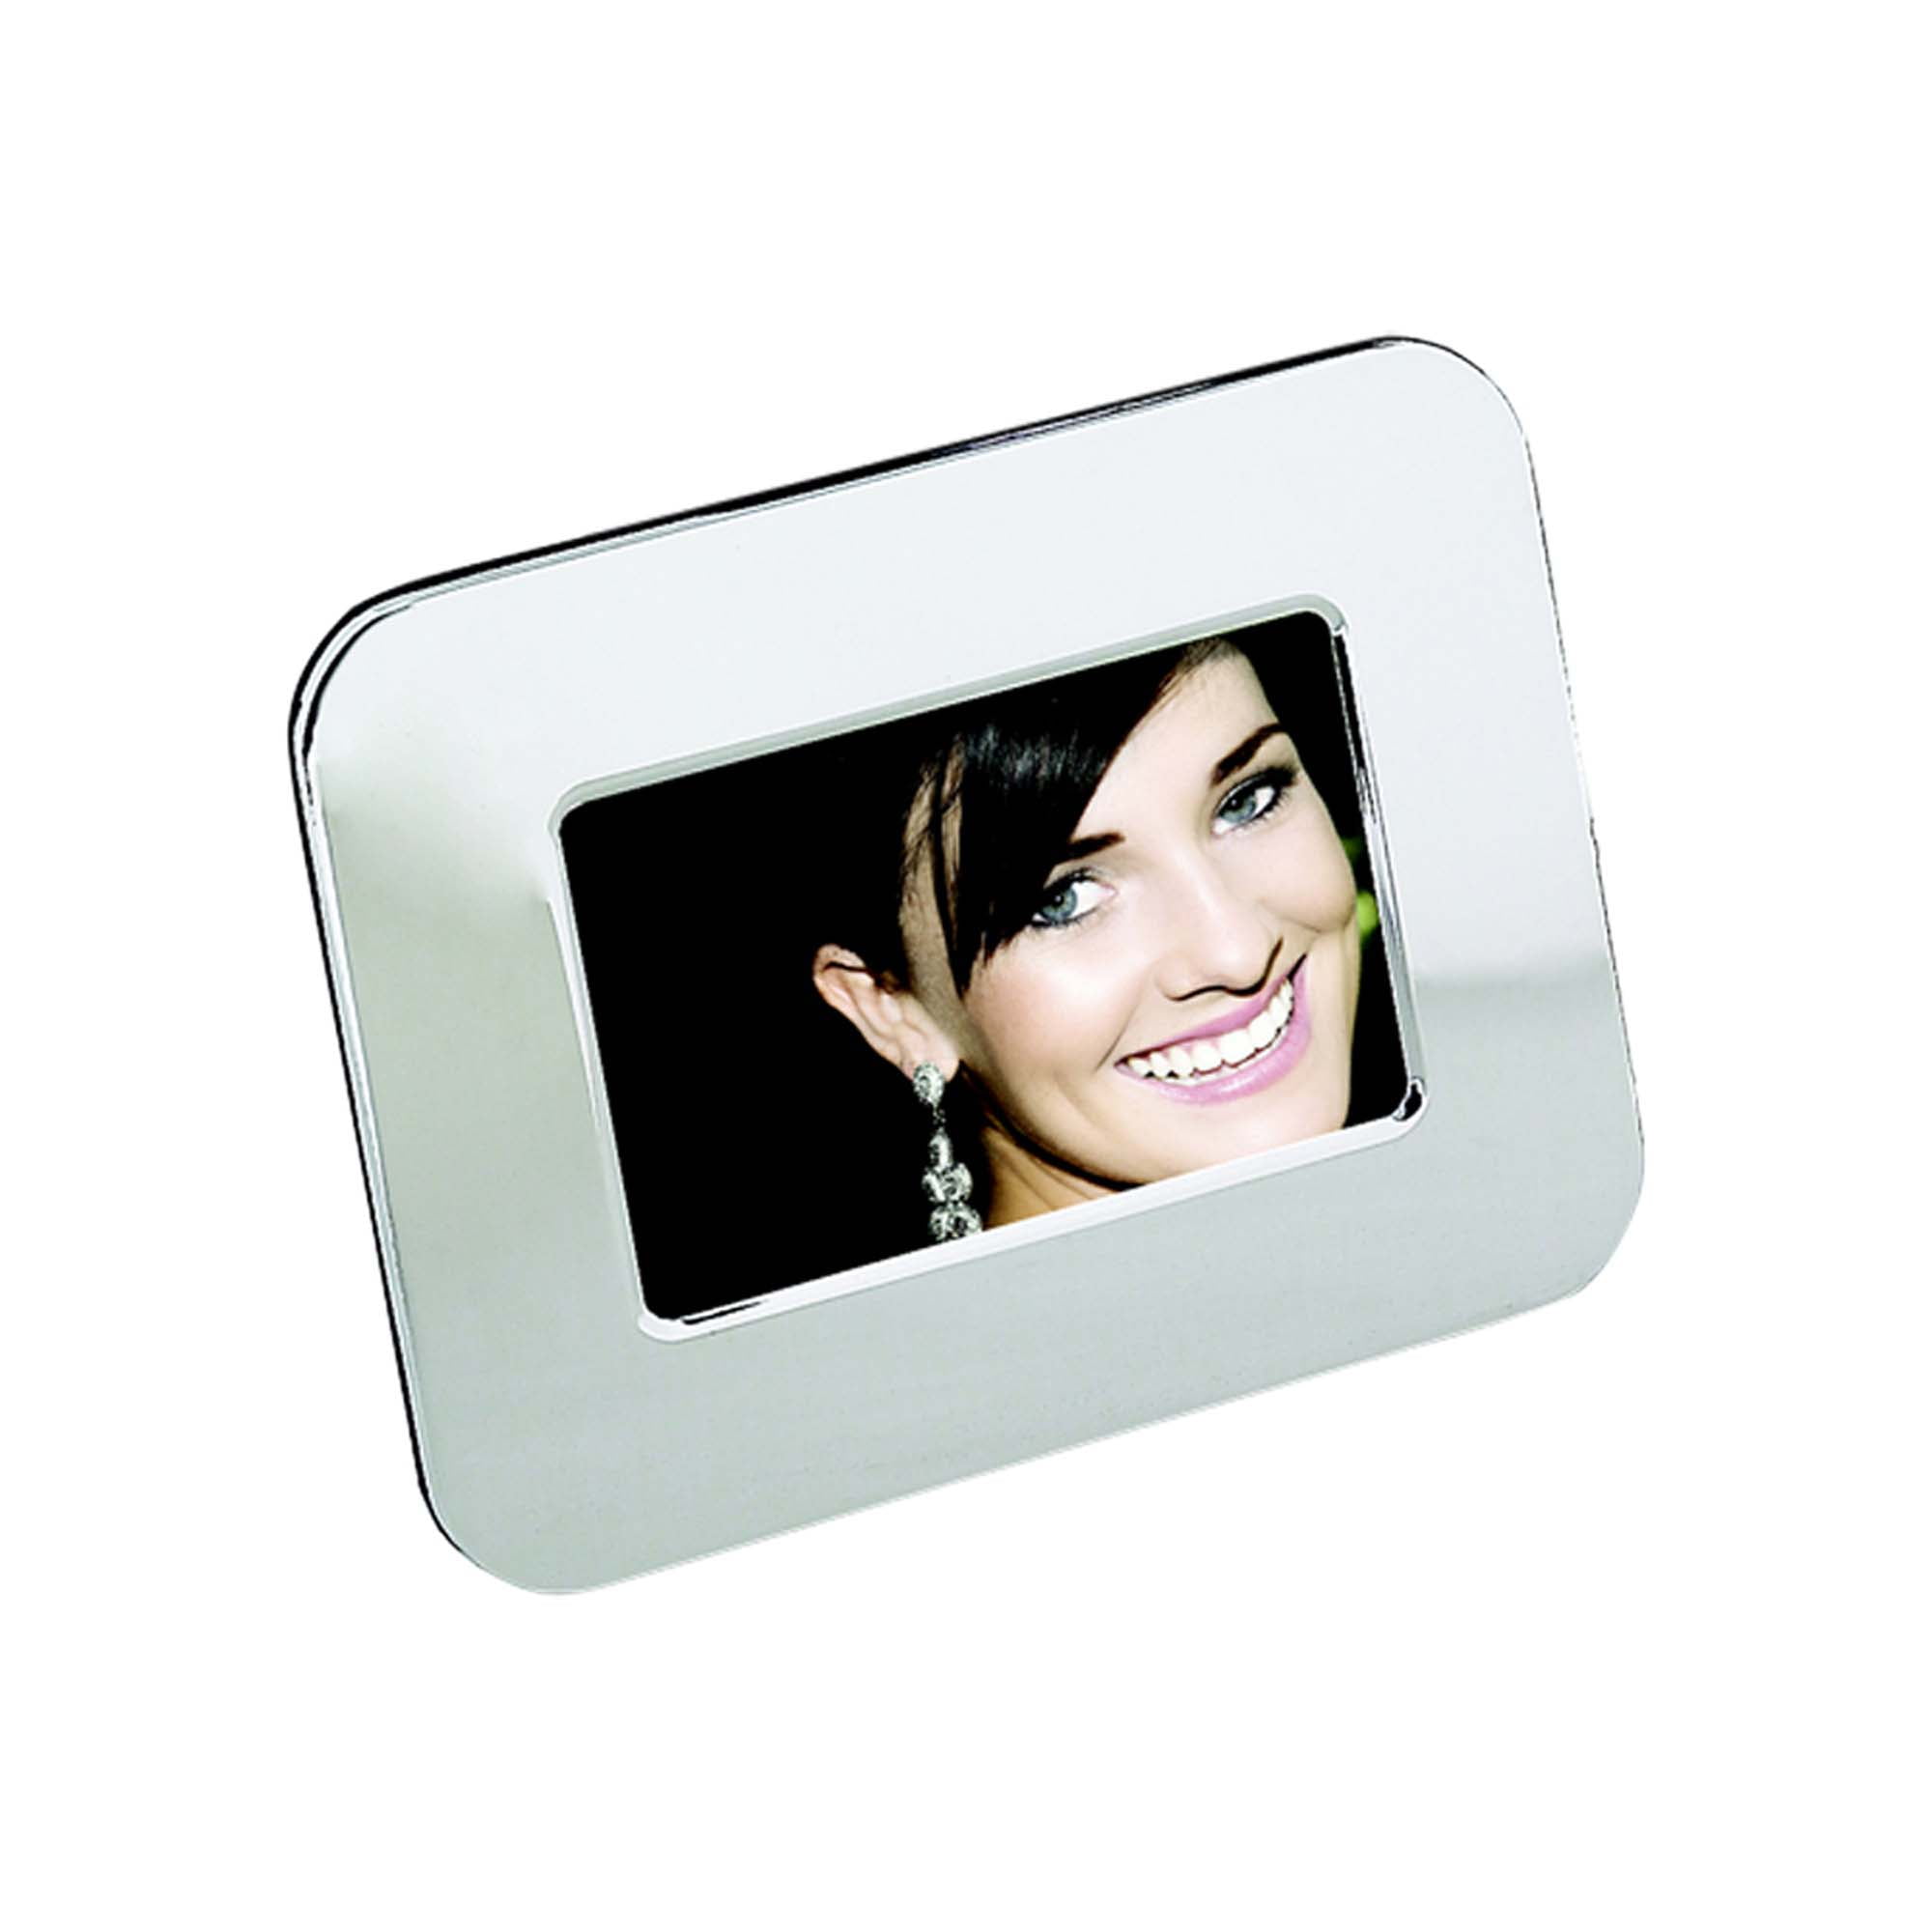 023702 8 X 10 In. Nickel Plated Radius Photo Frame - Silver